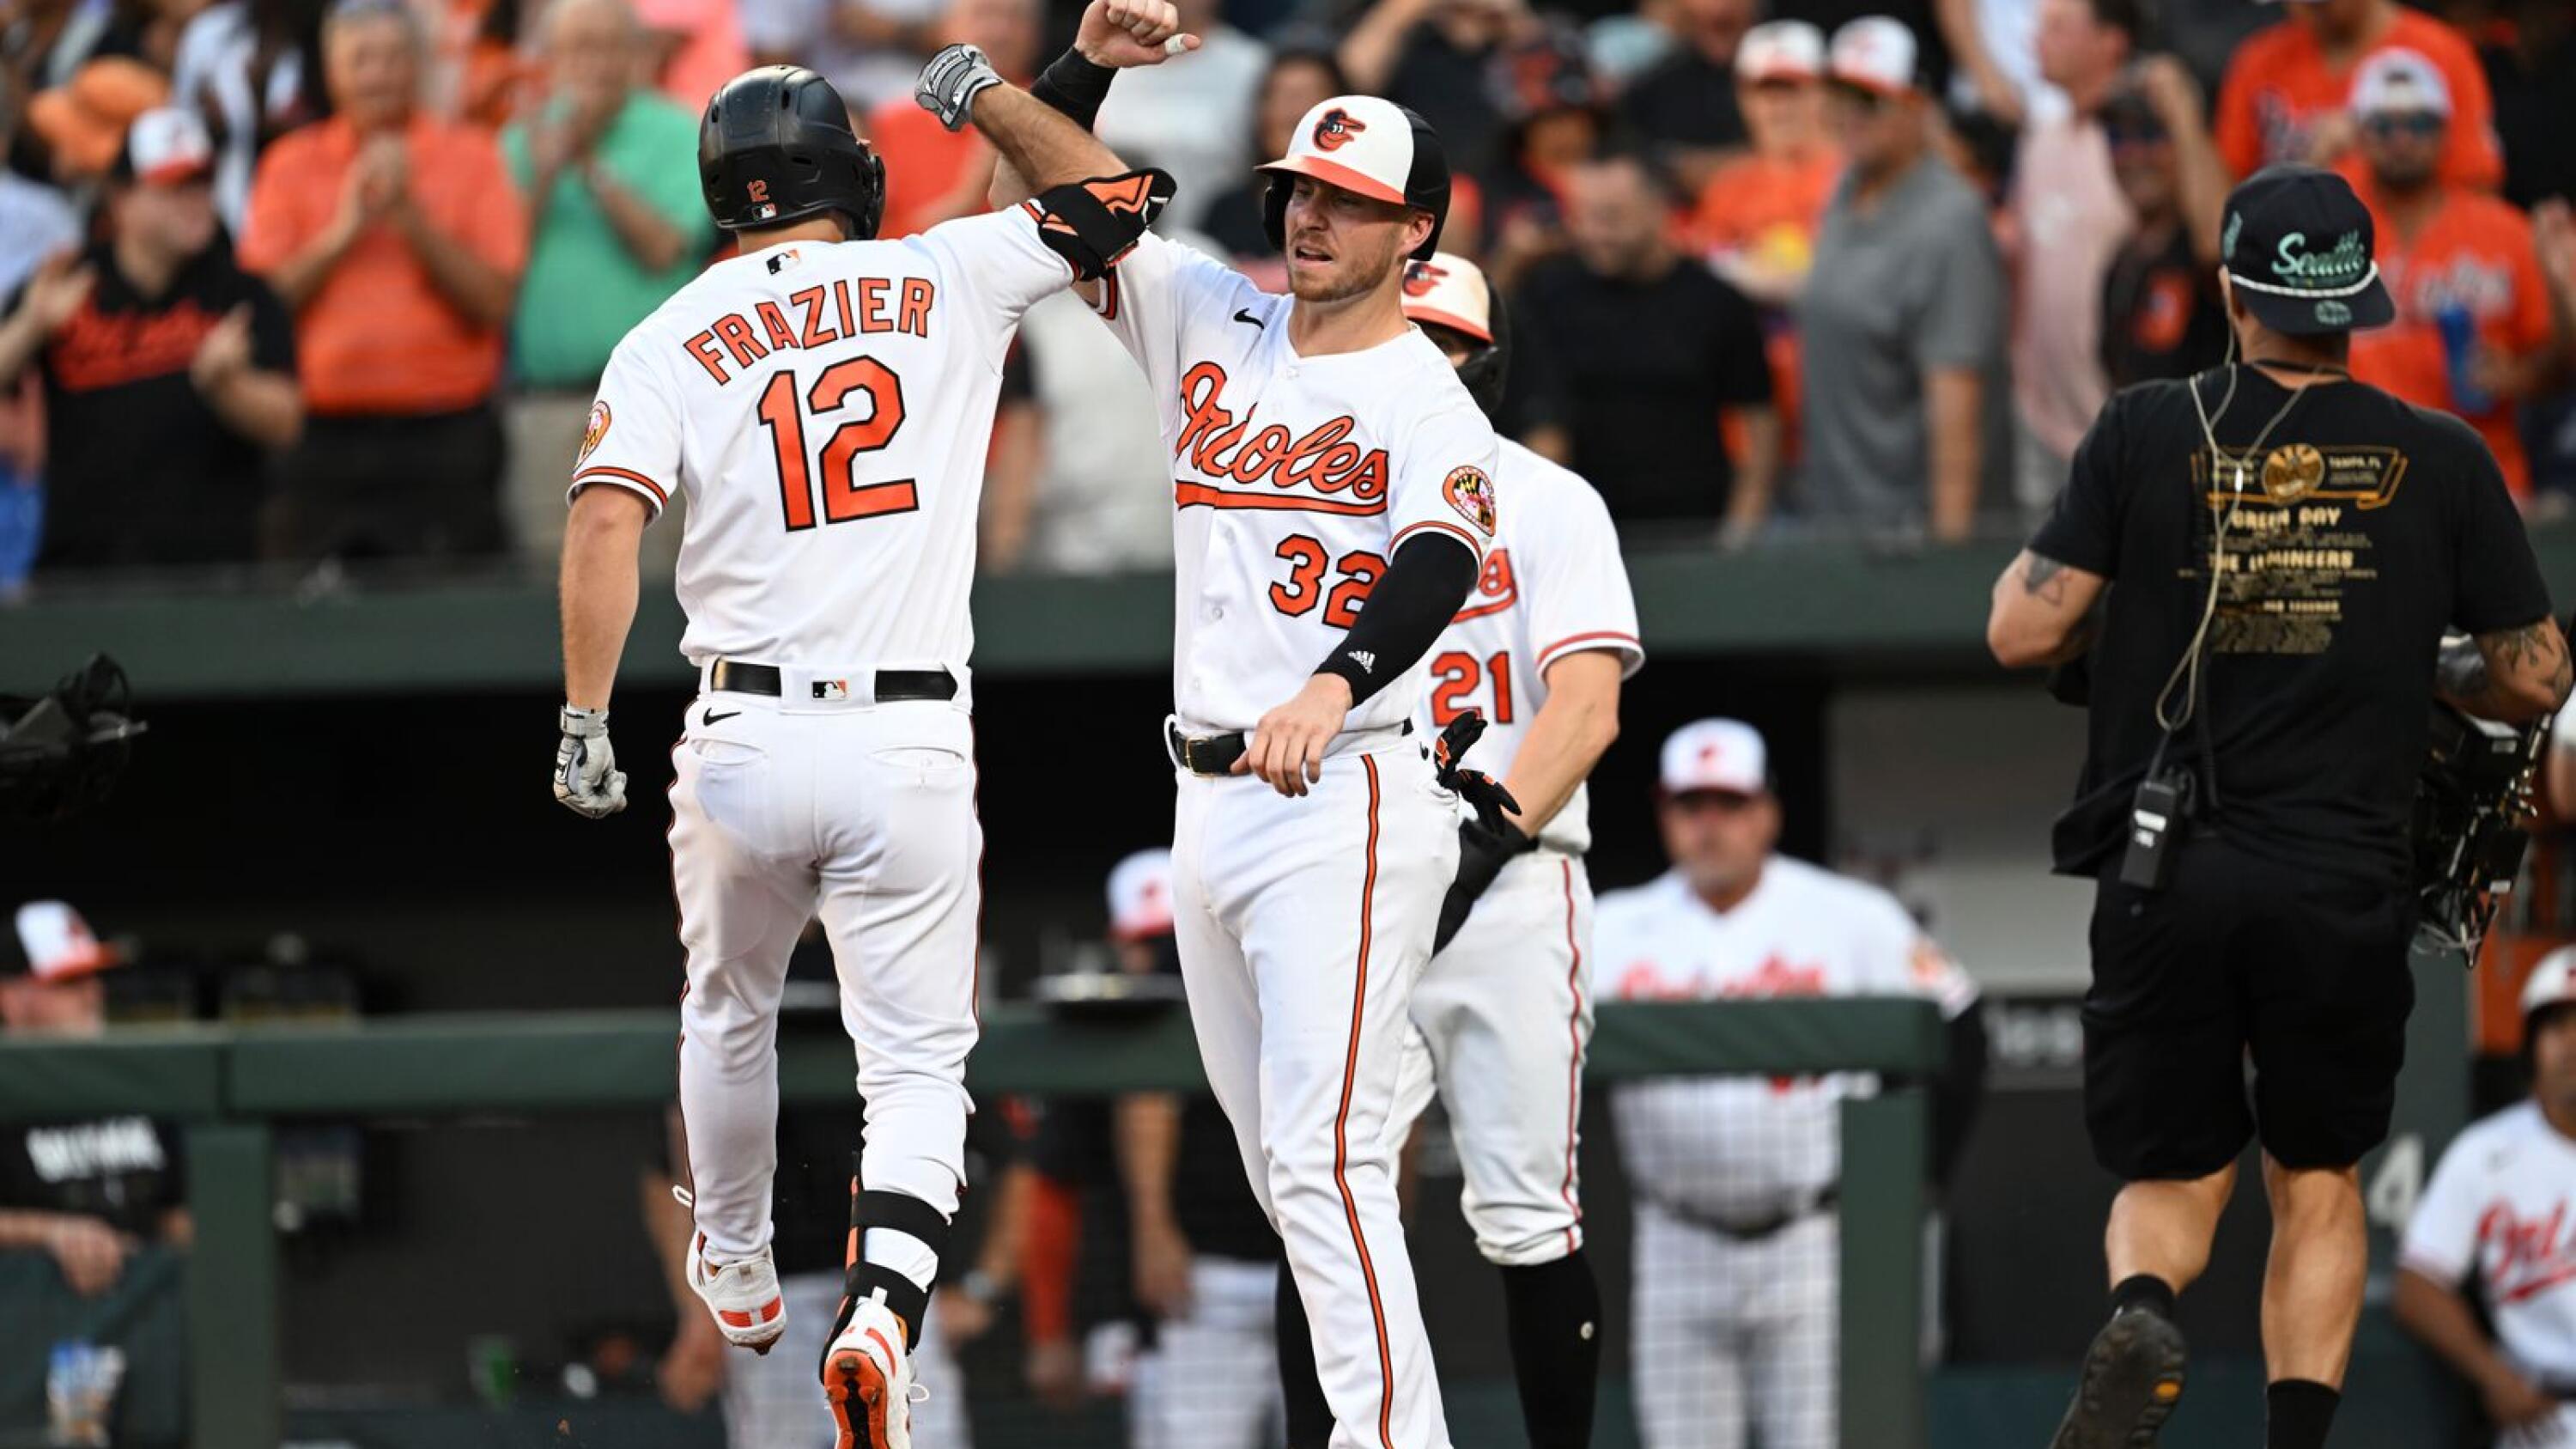 Orioles Announce 2018 Promotions and Giveaways